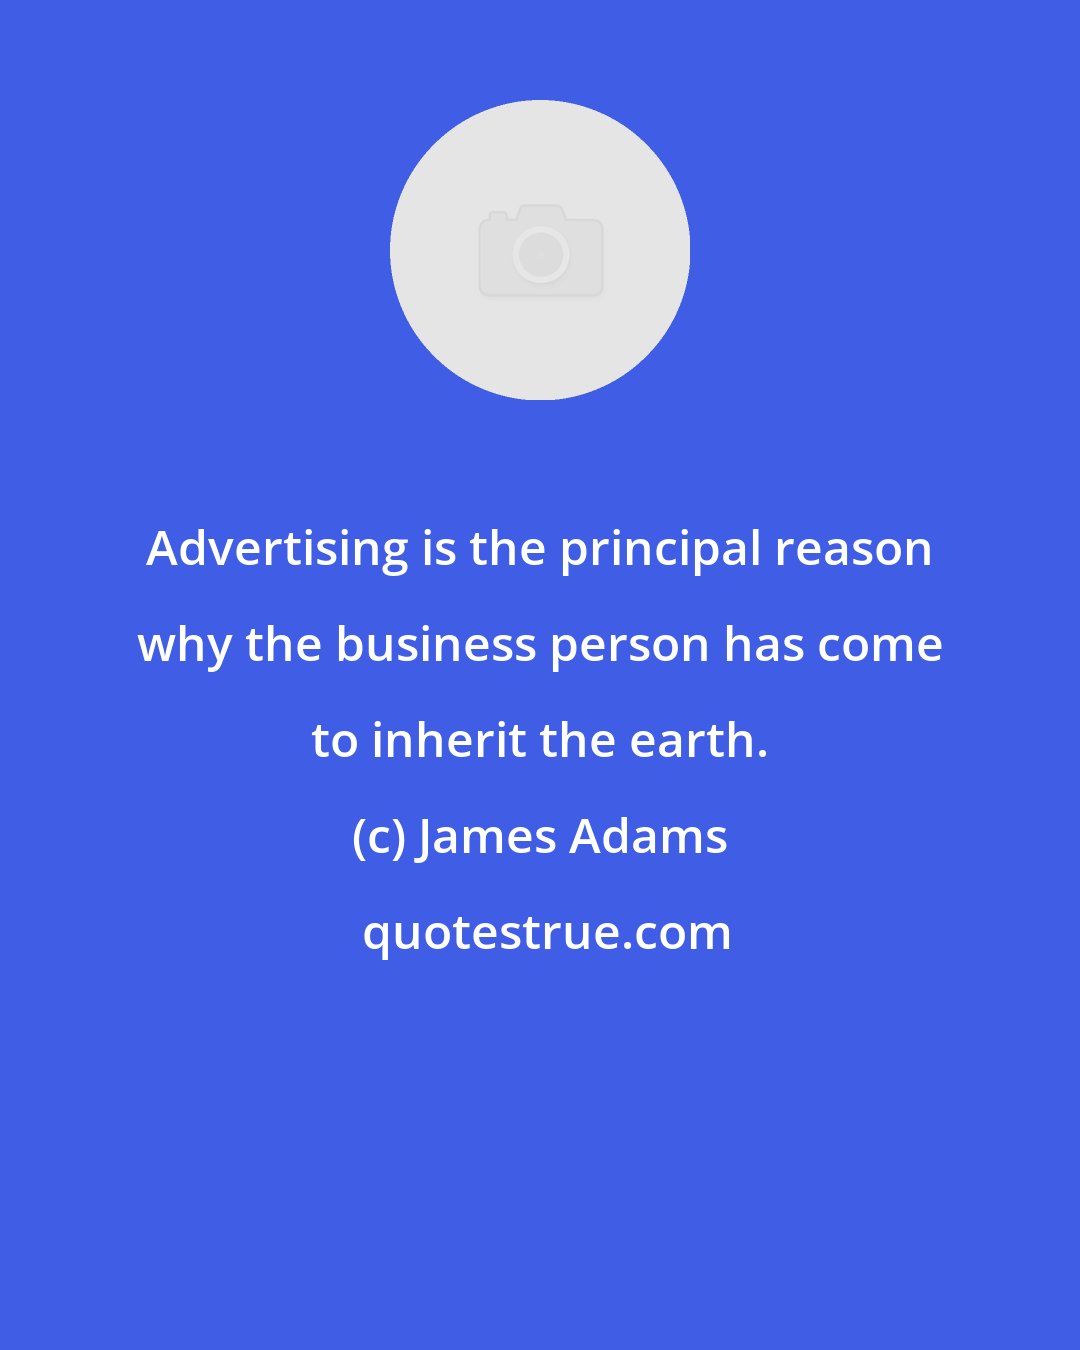 James Adams: Advertising is the principal reason why the business person has come to inherit the earth.